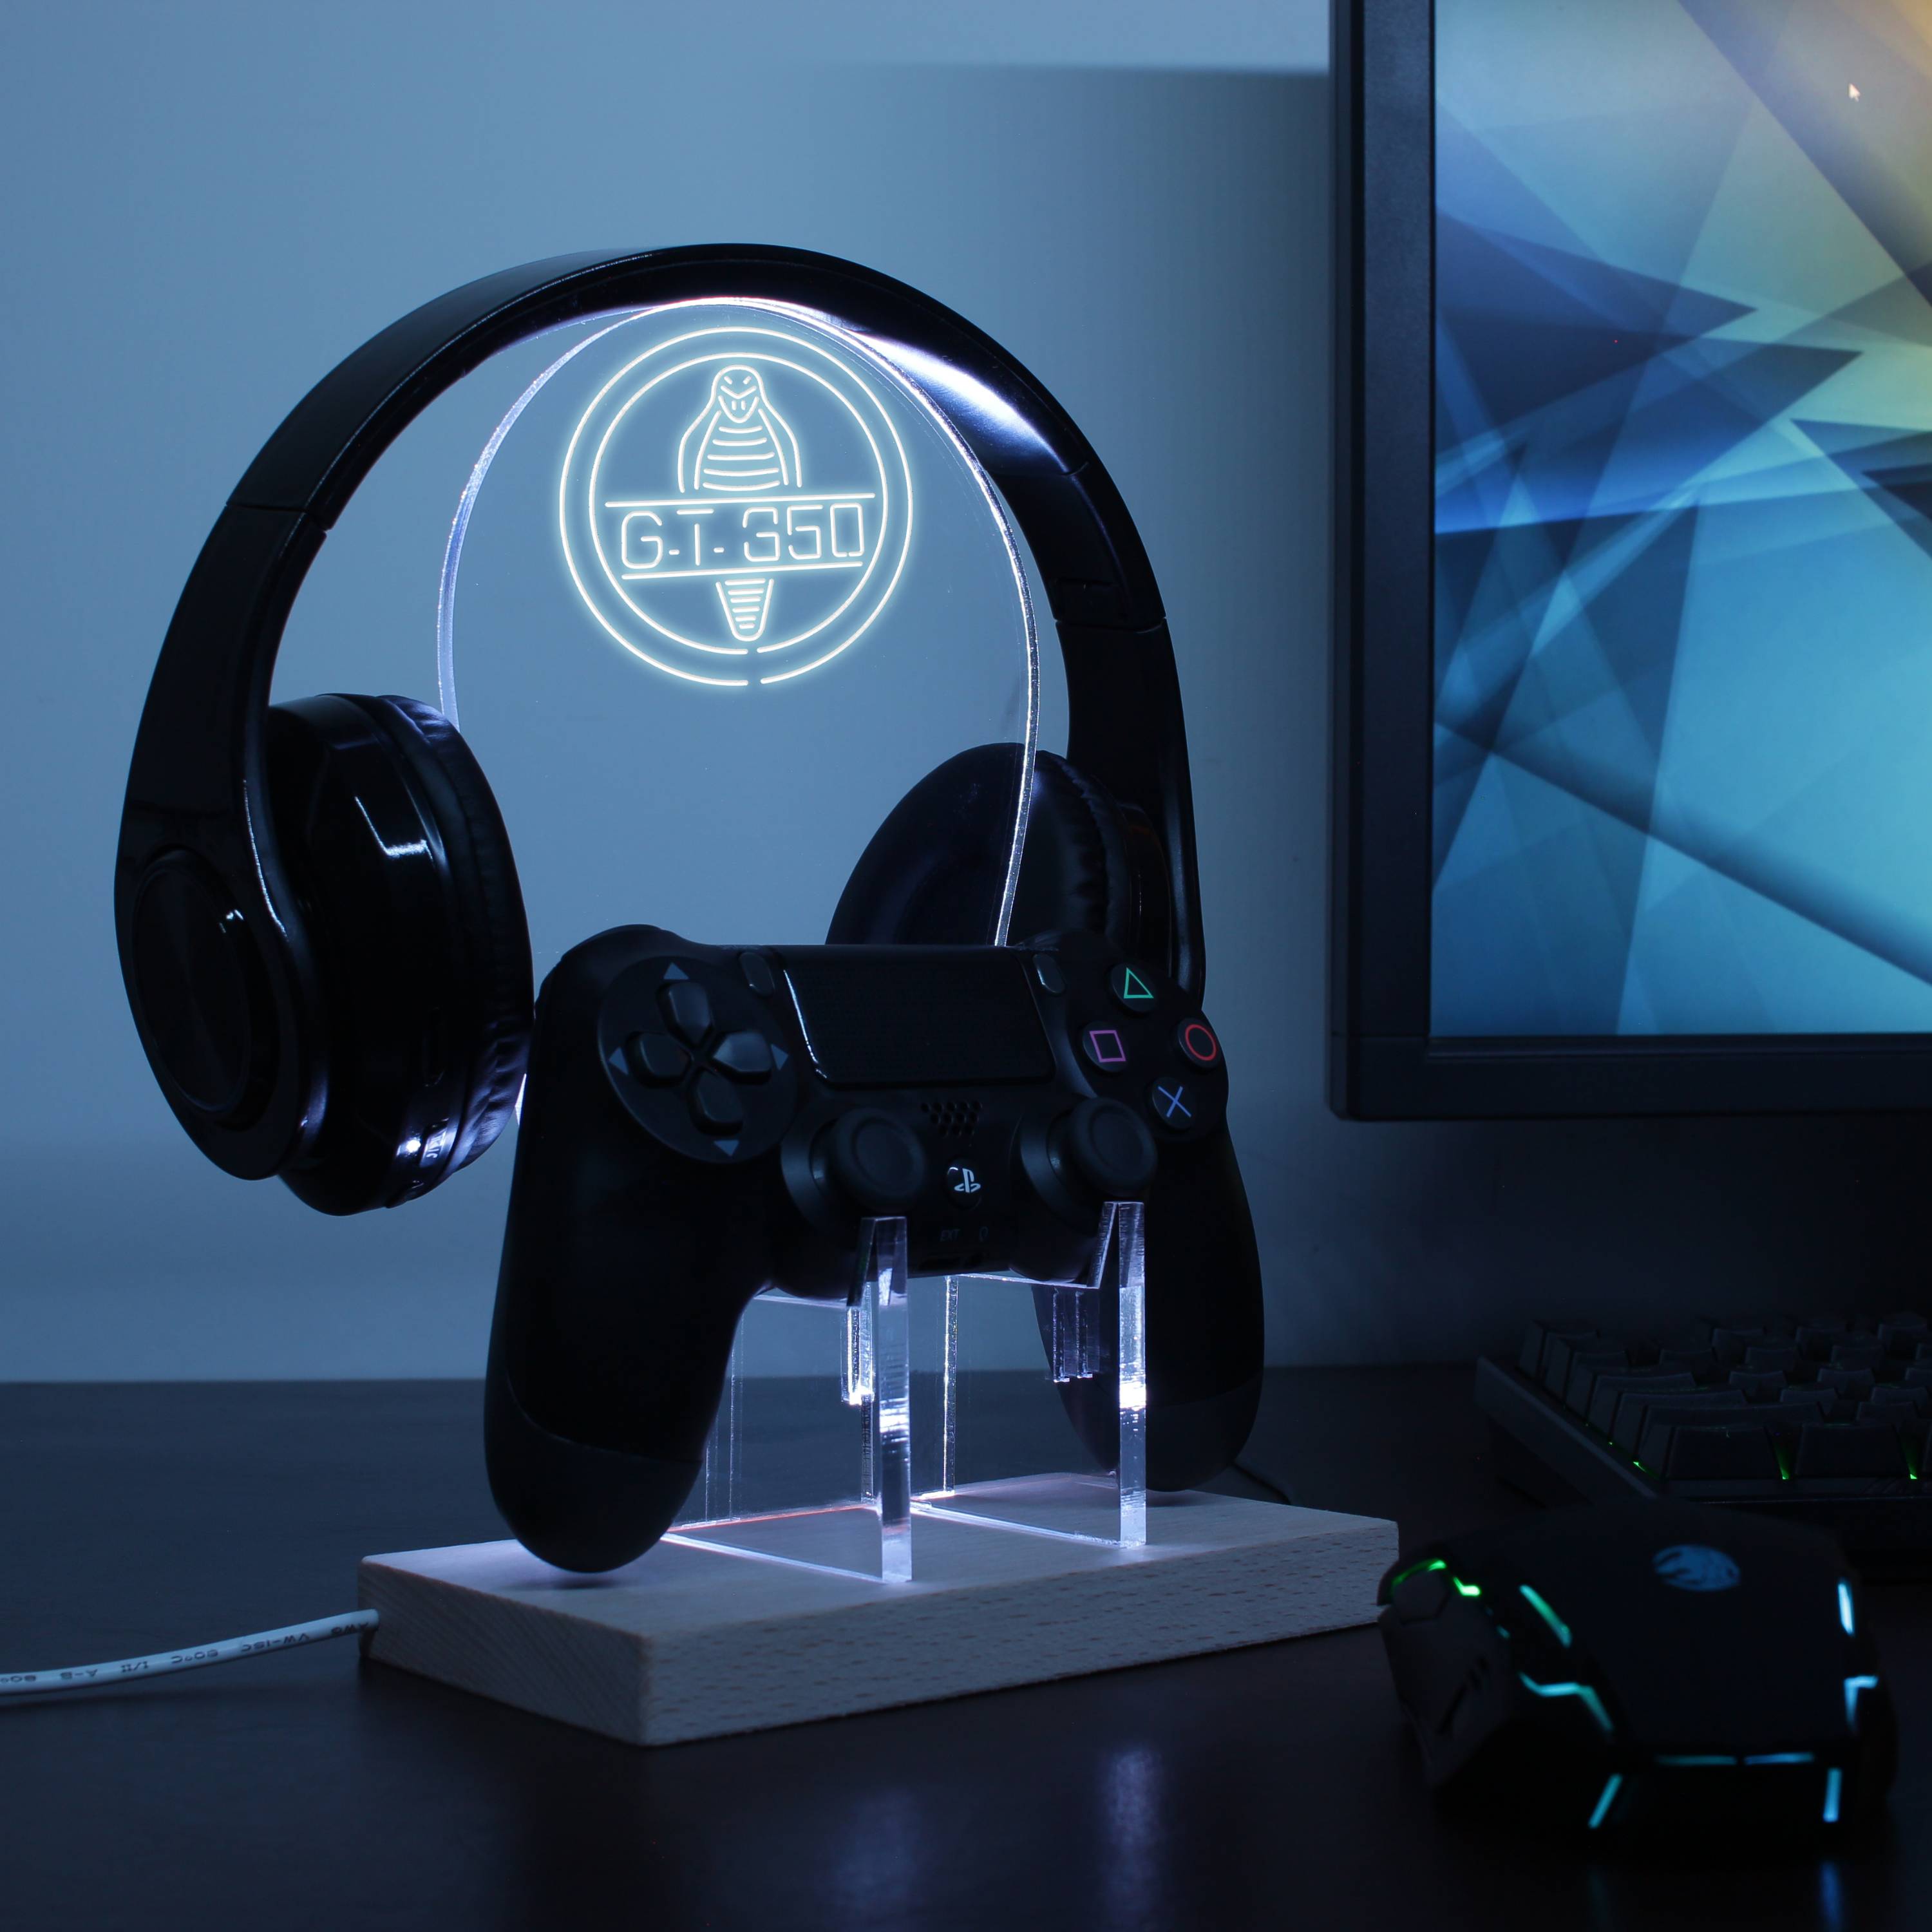 GT350 Cobra Car LED Gaming Headset Controller Stand